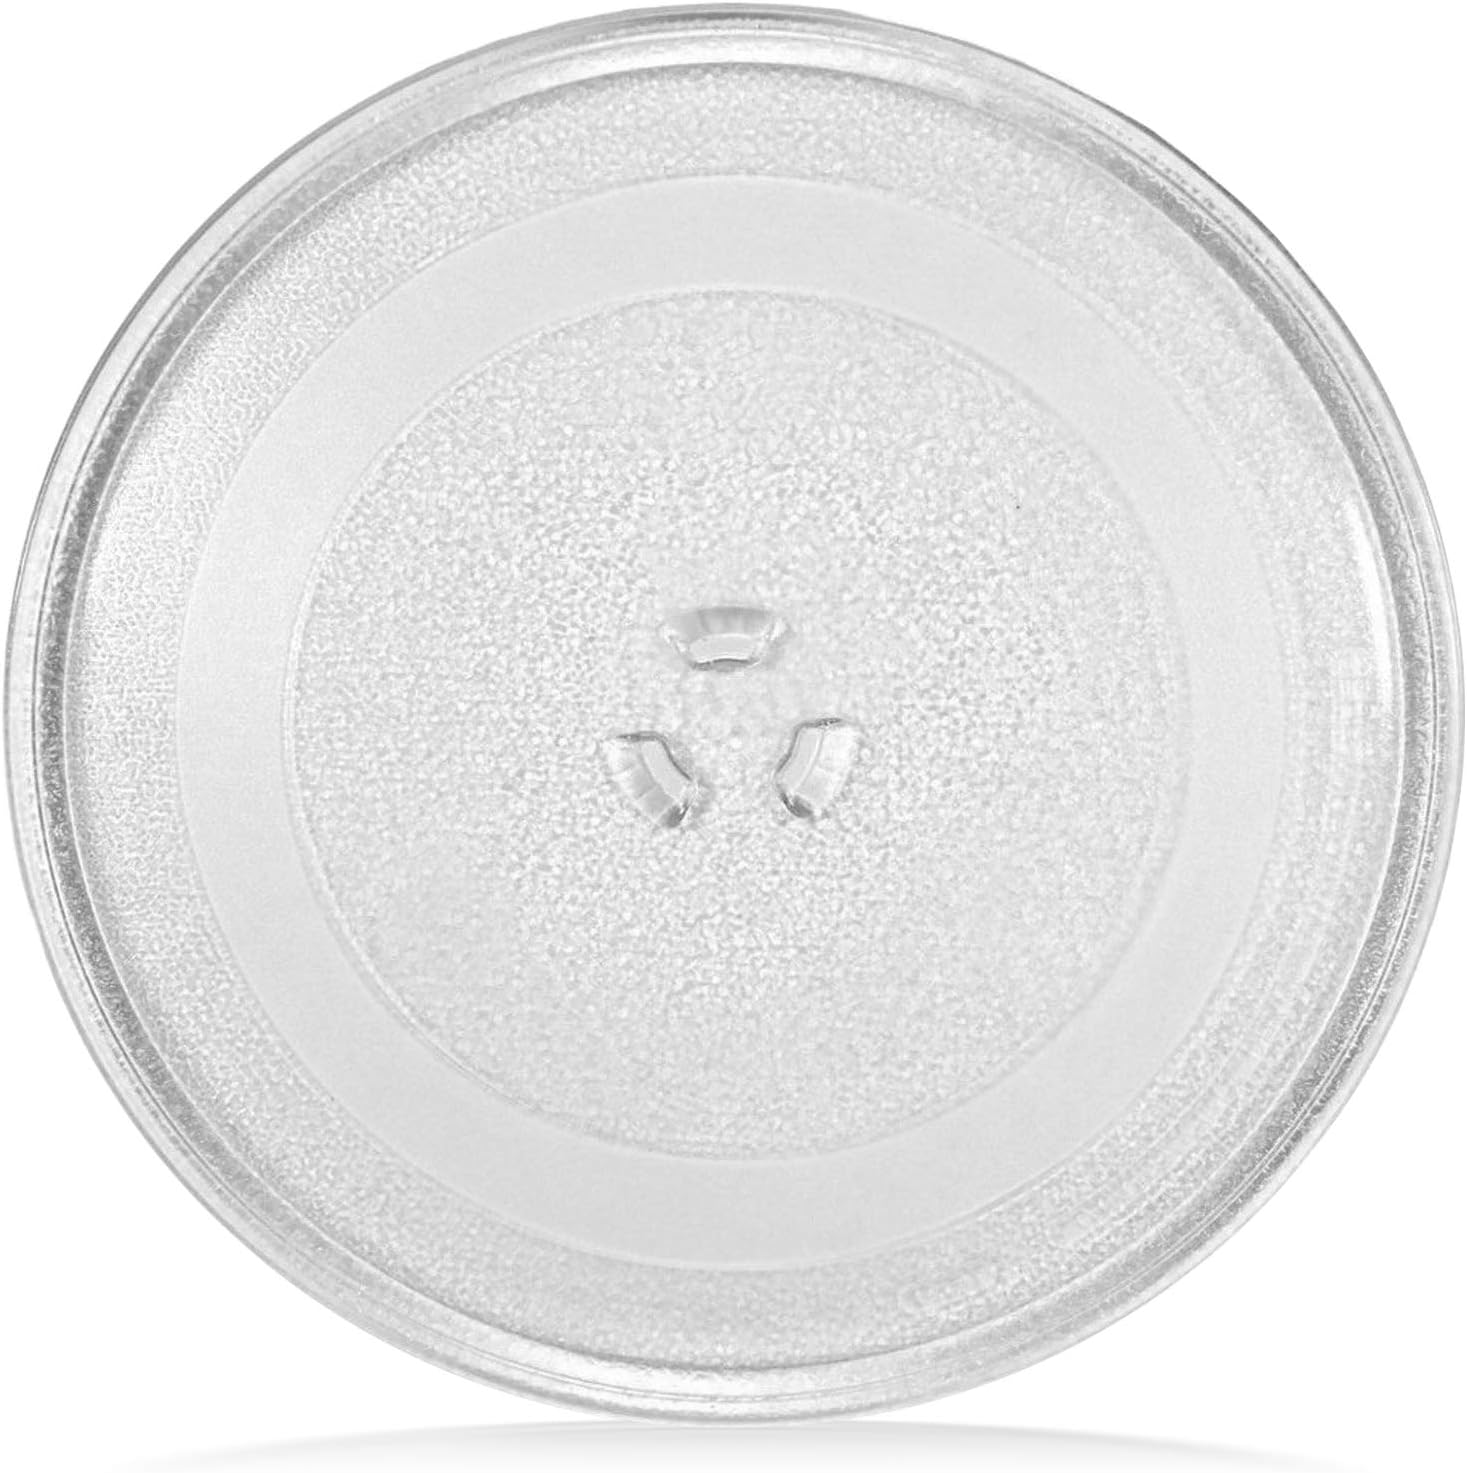 kenmore and lg compatible microwave glass plate